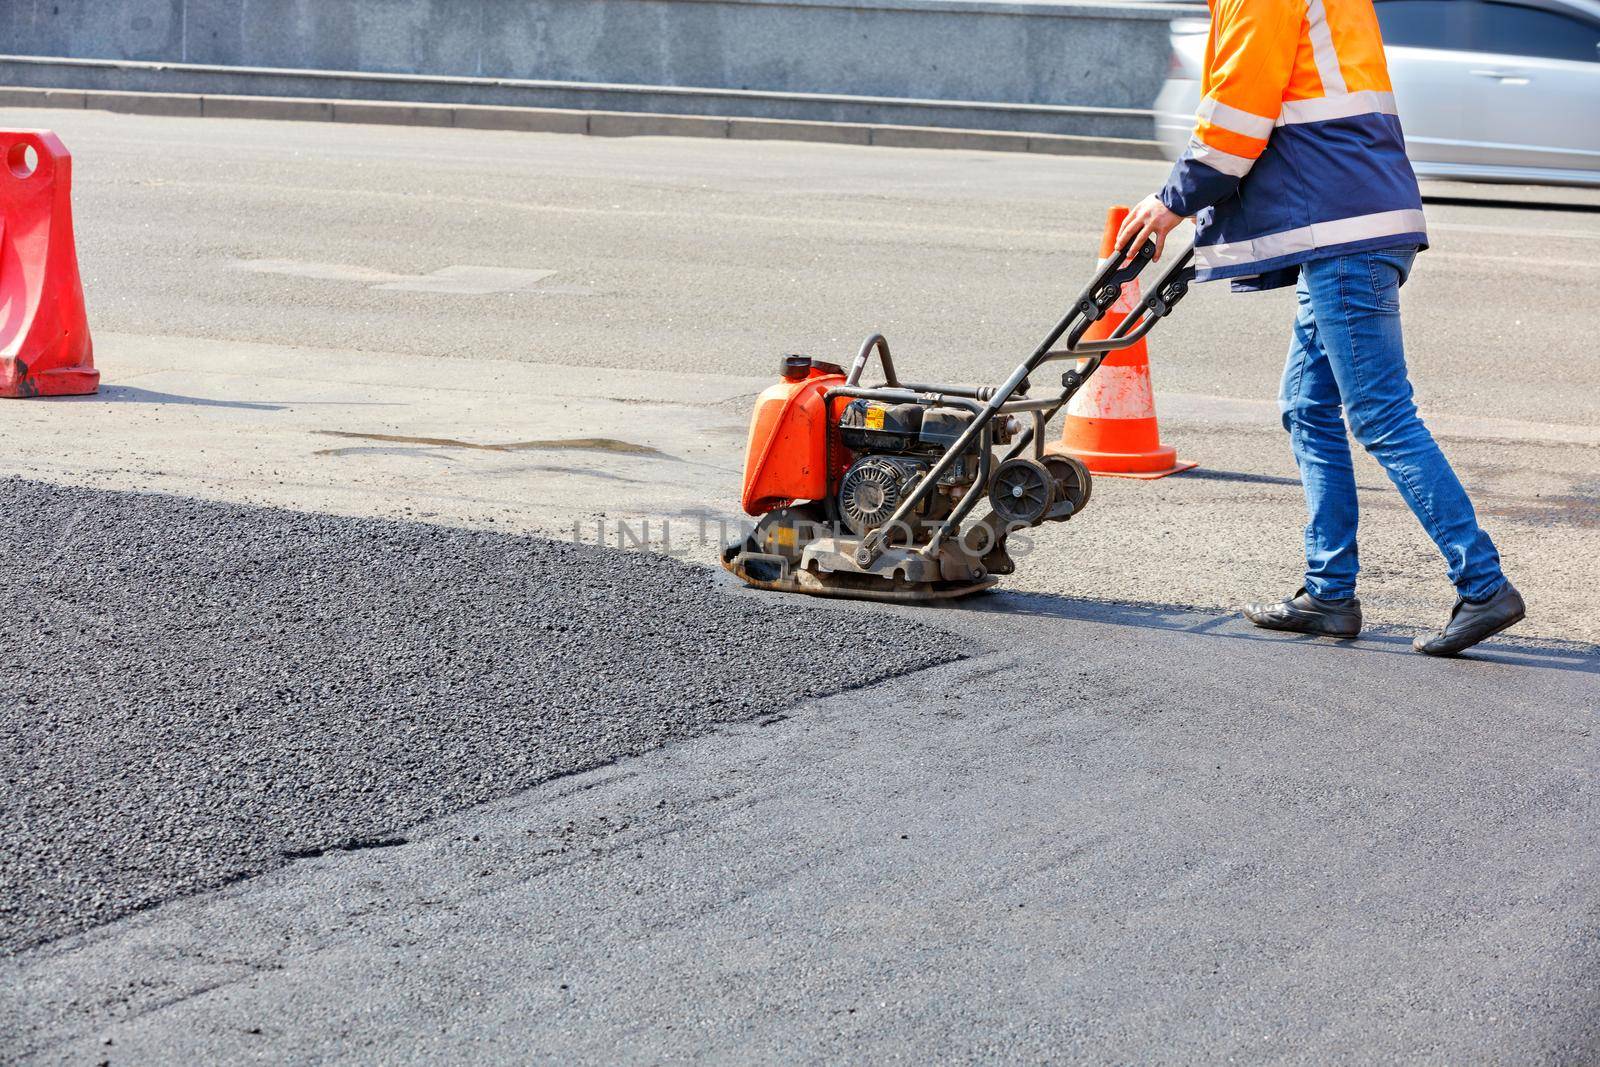 A road worker uses a vibratory plate to compact asphalt on a fenced road repair site on a bright sunny day.